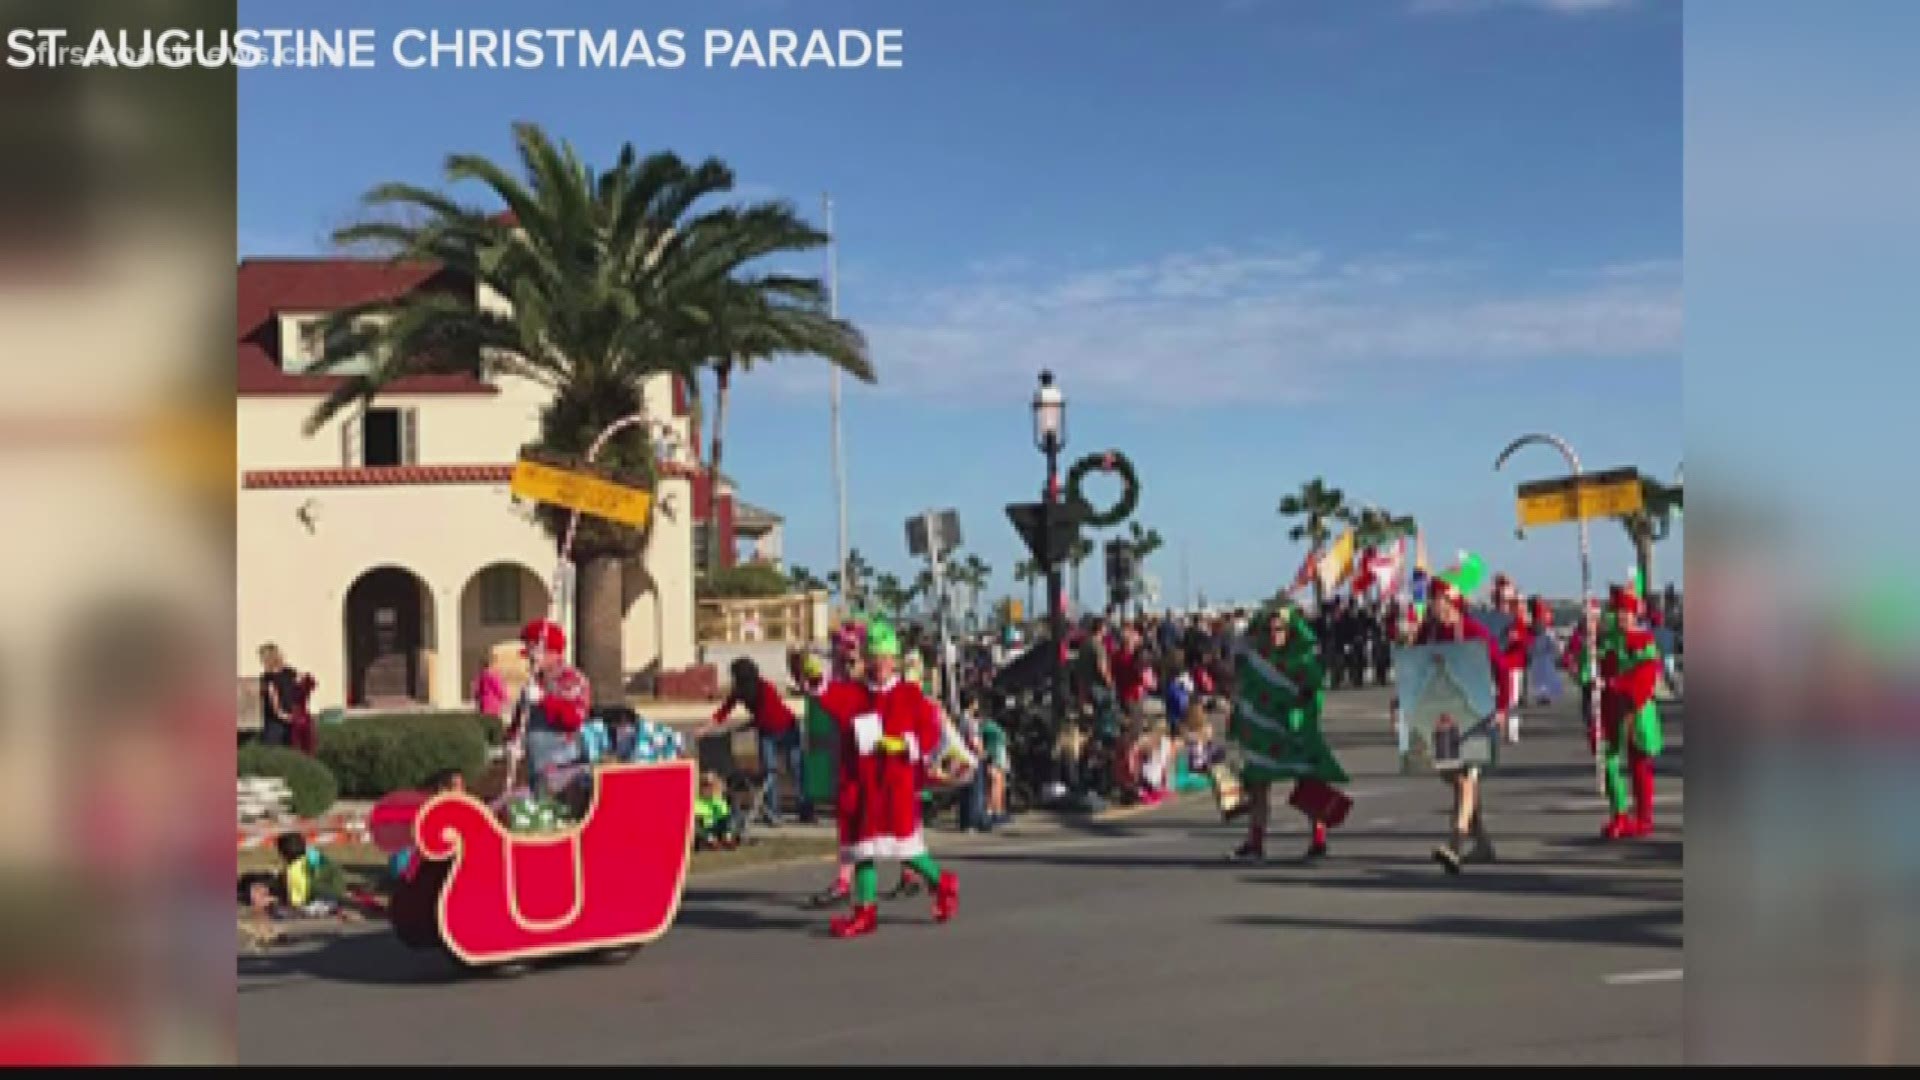 65th annual St. Augustine Christmas Parade to take place Saturday